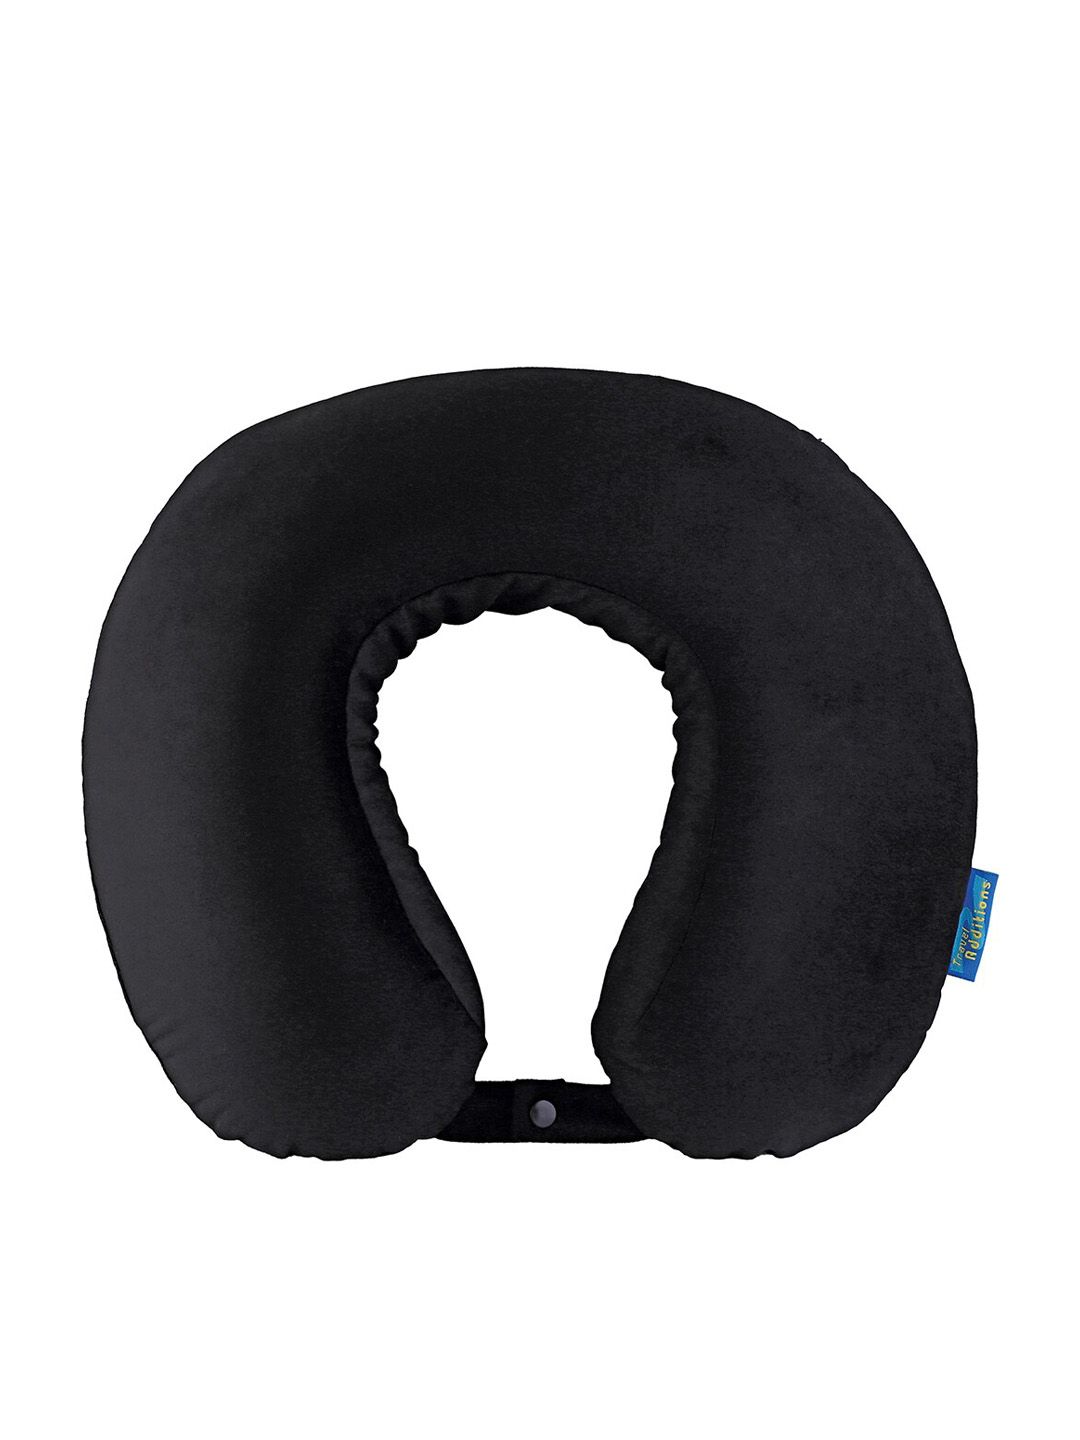 Travel Blue Black Solid Memory Foam Travel Pillow Price in India